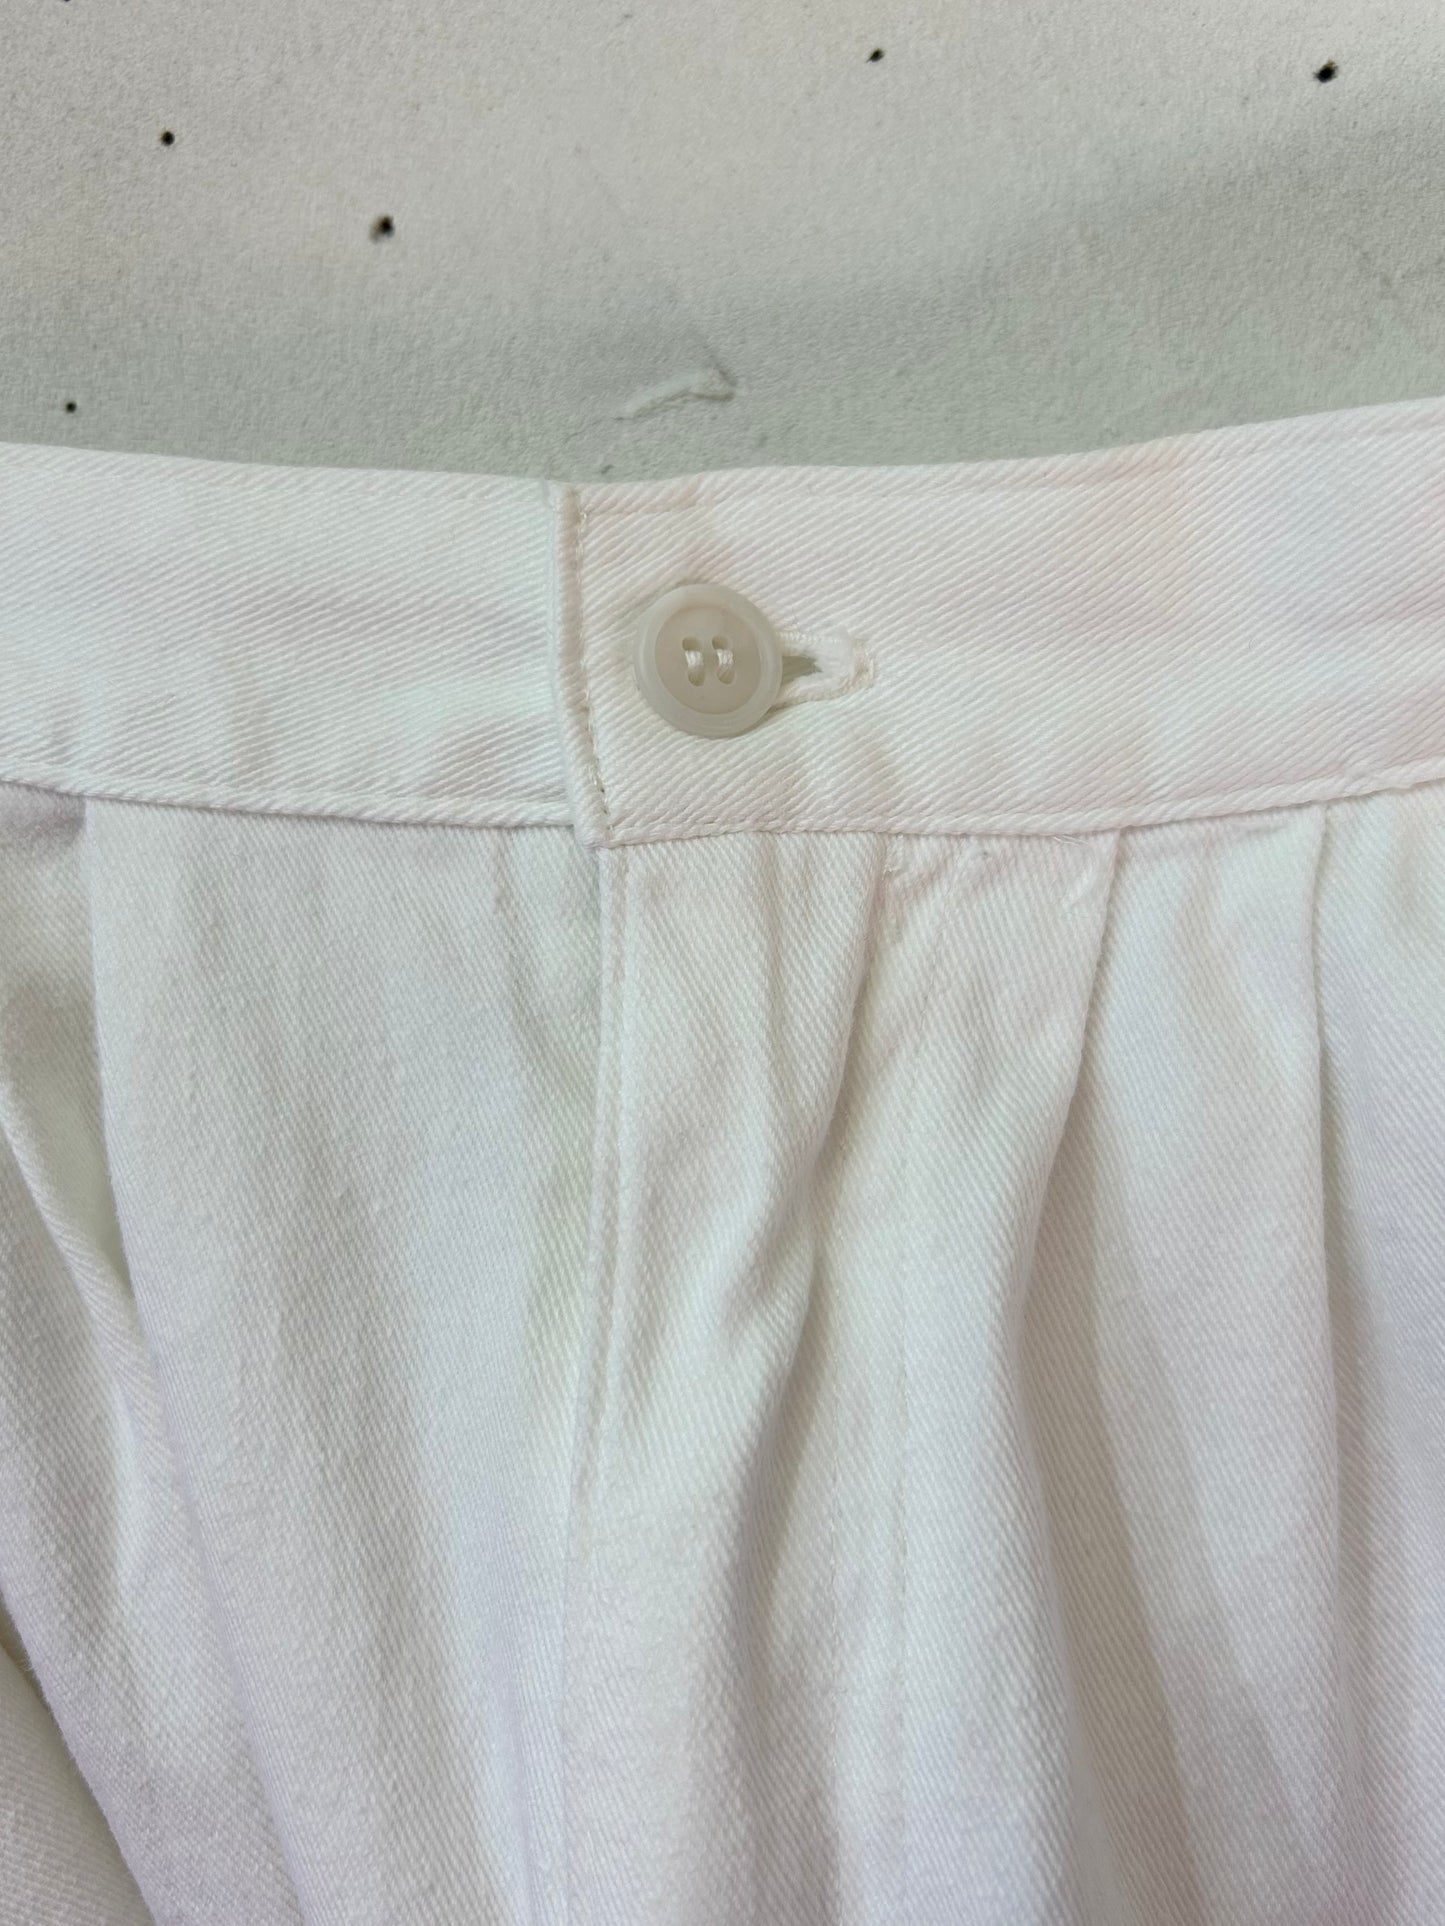 Vintage White Cotton Skirt MADE IN USA [B26230]